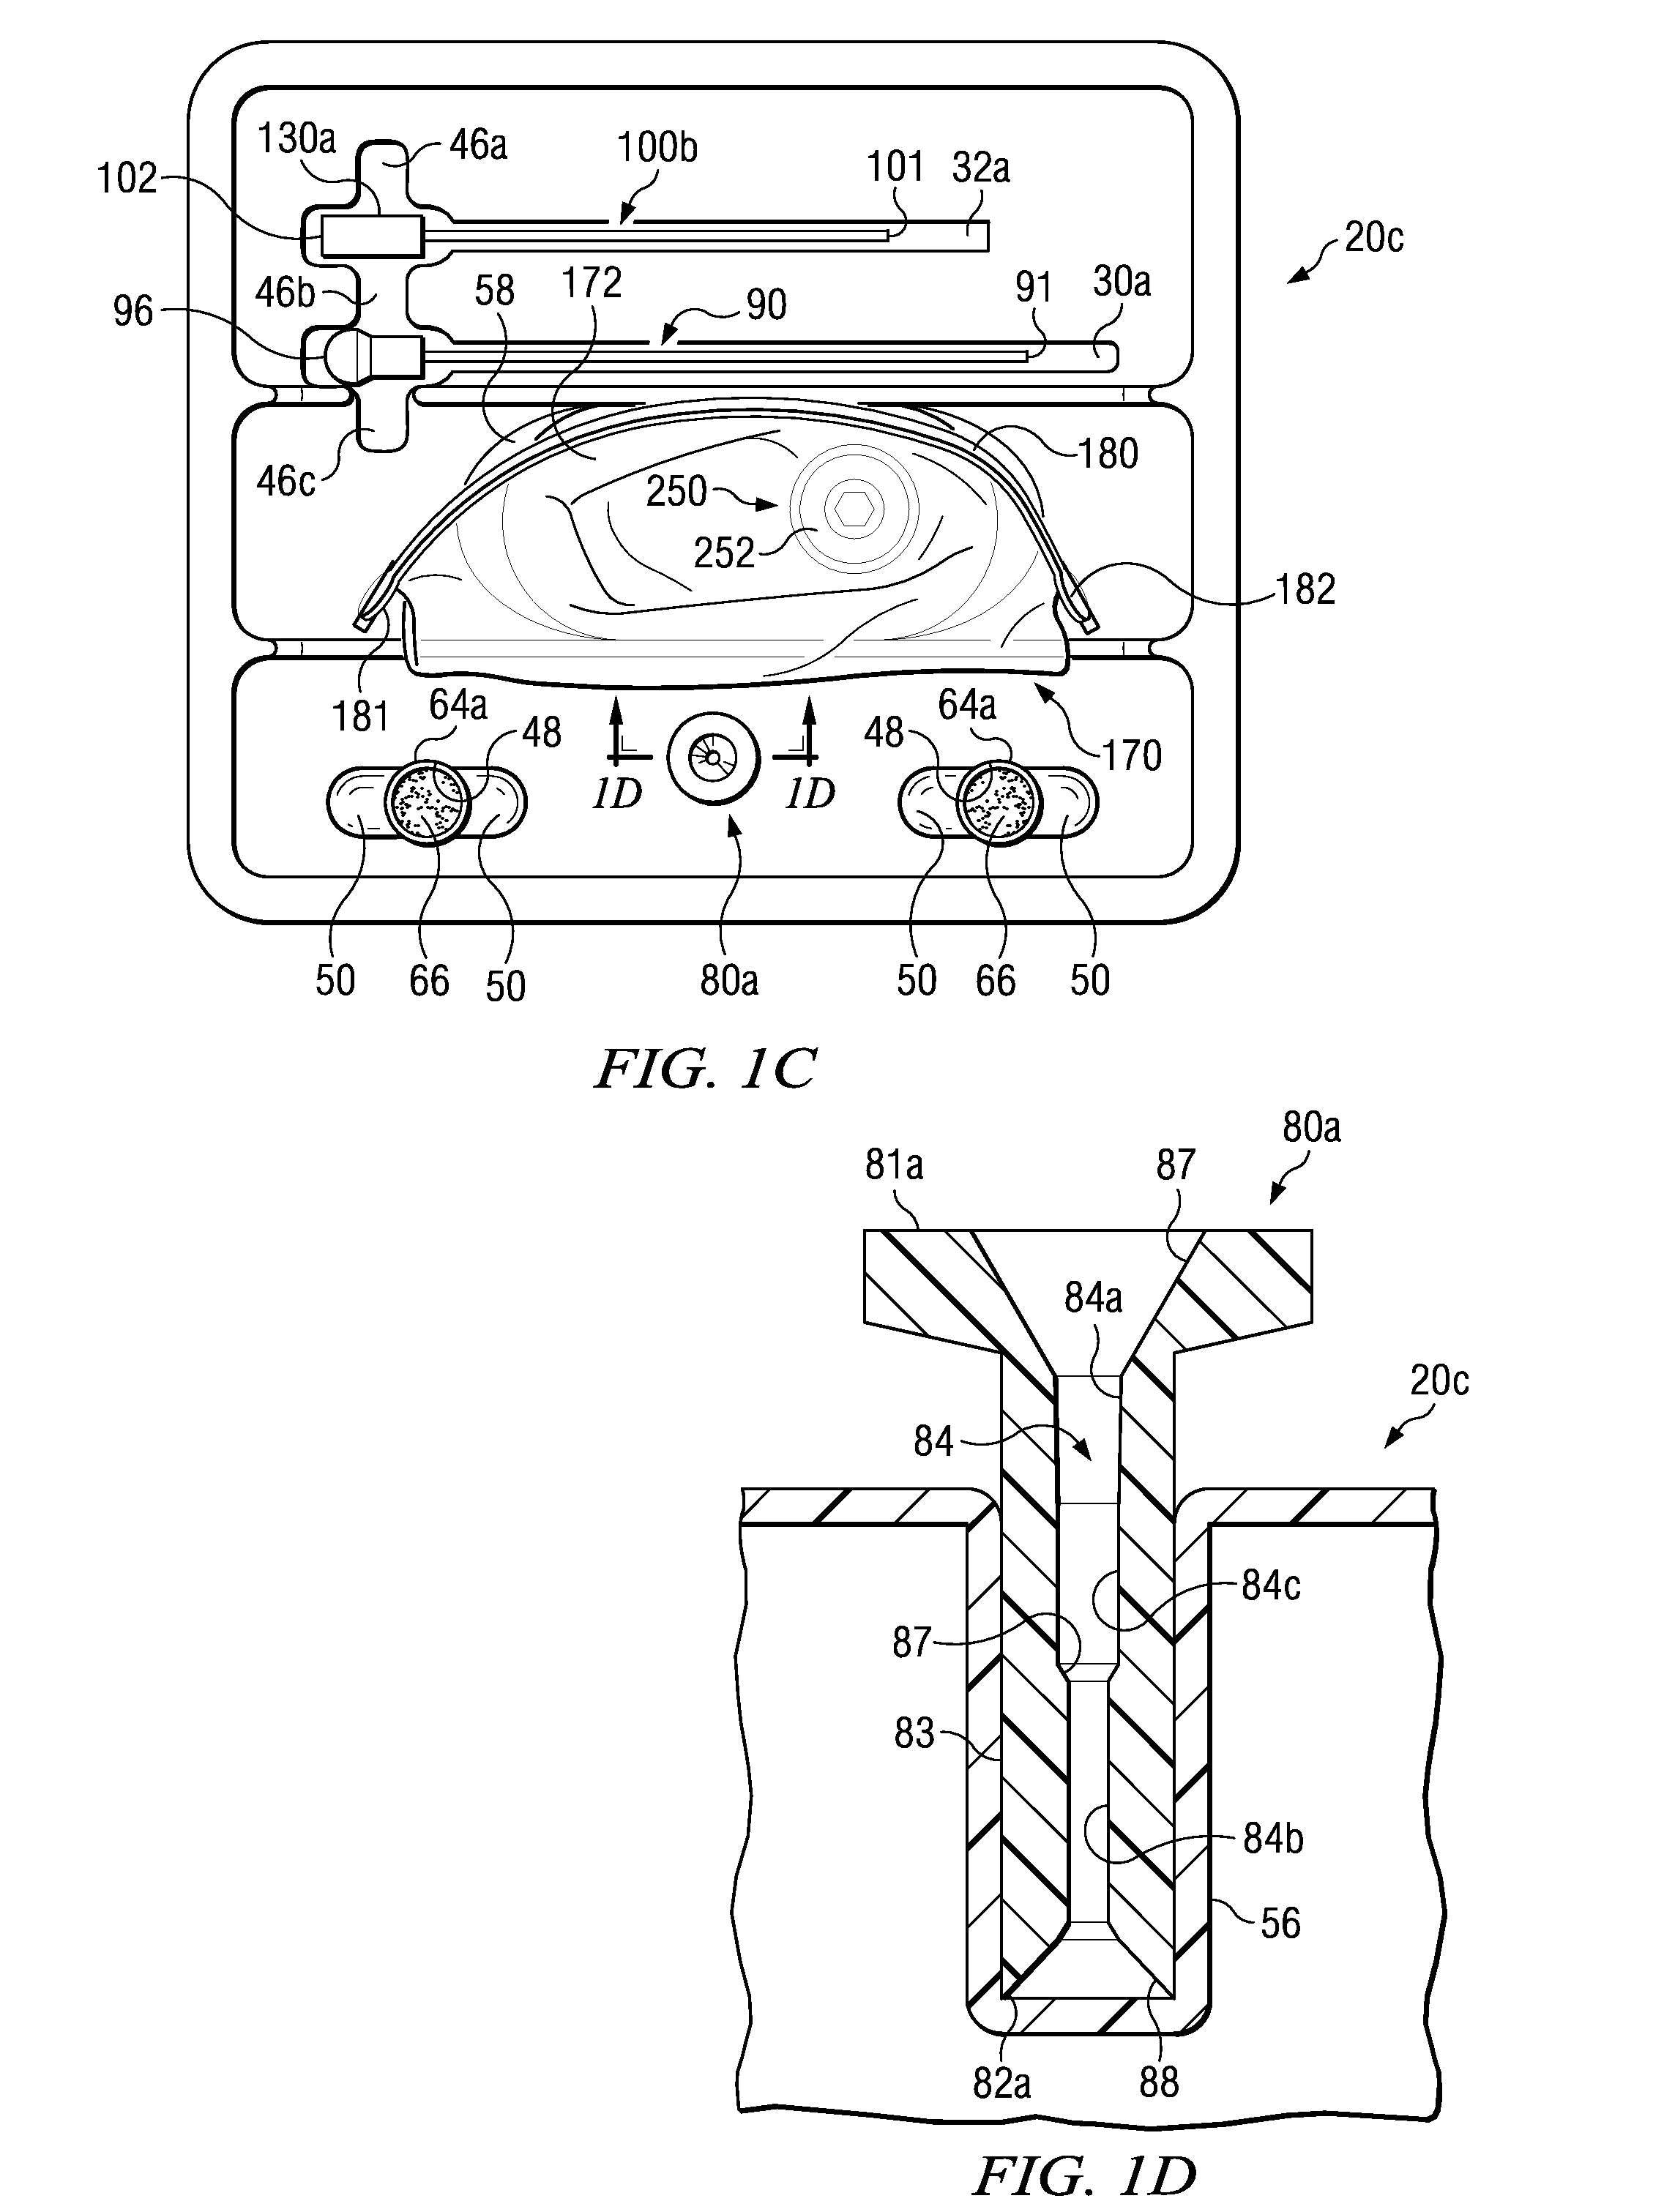 Biopsy Devices and Related Methods